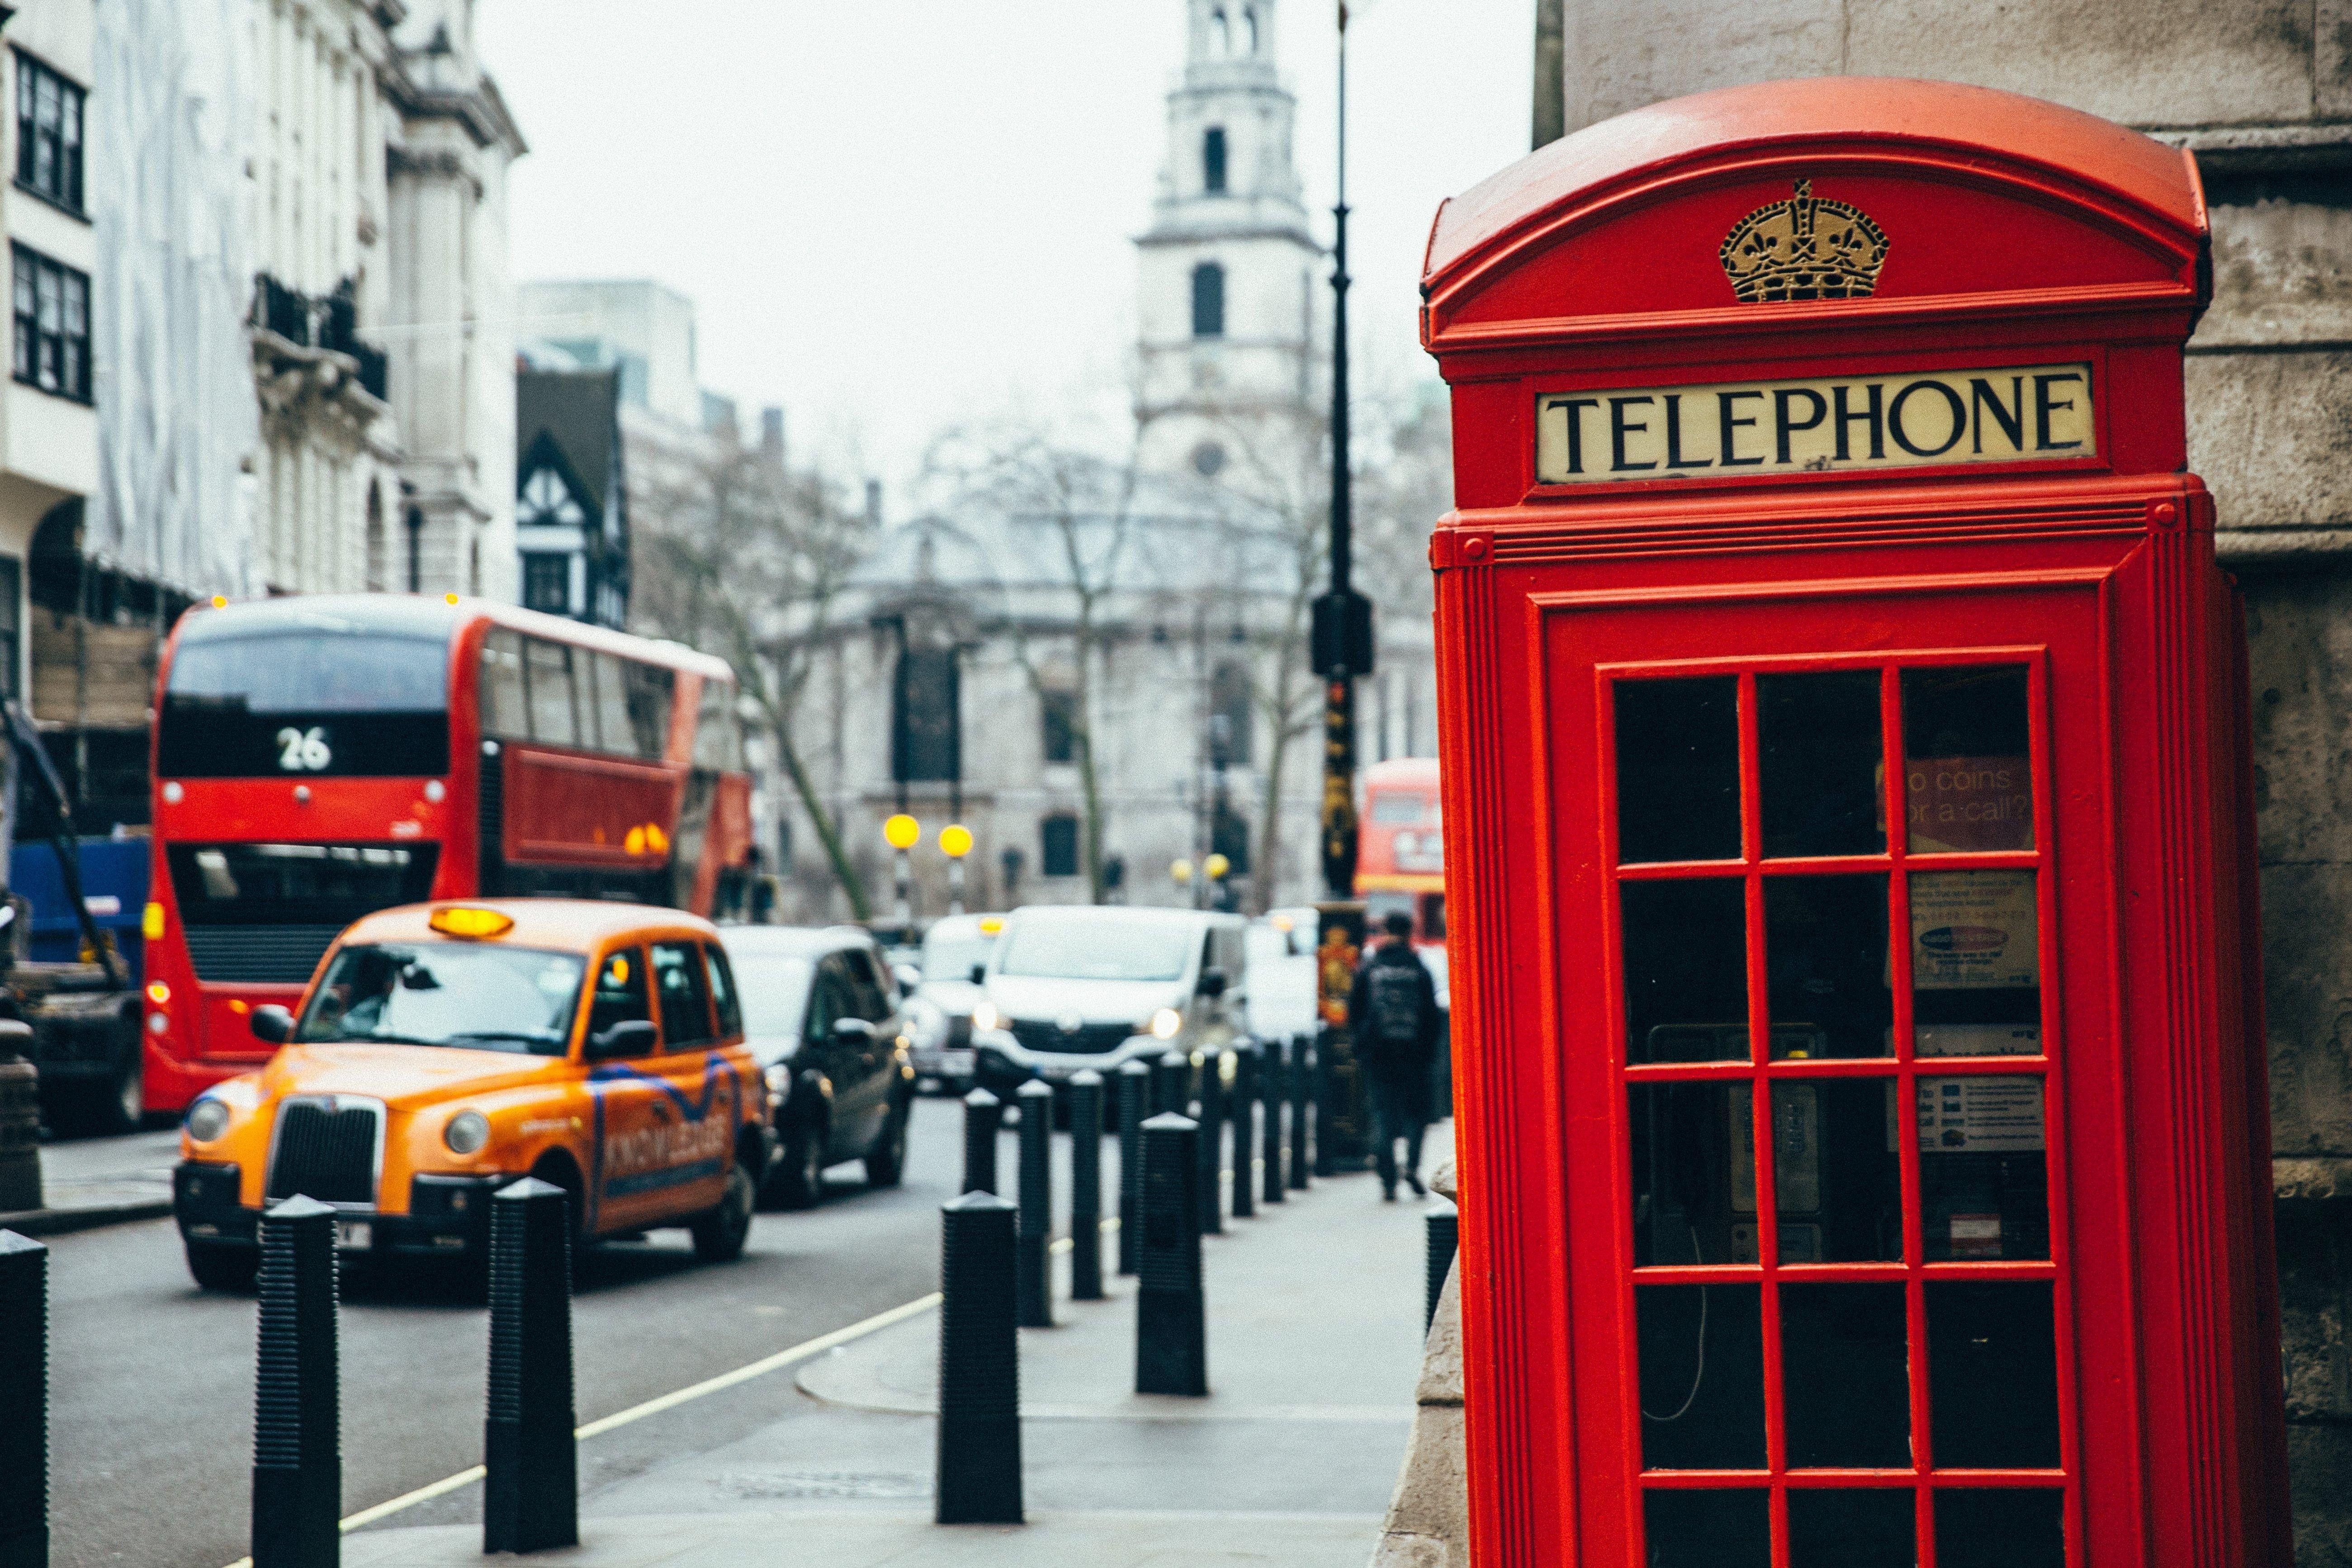 Telephone Booth Accent London Bus Wallpaper for Phone and HD Desktop